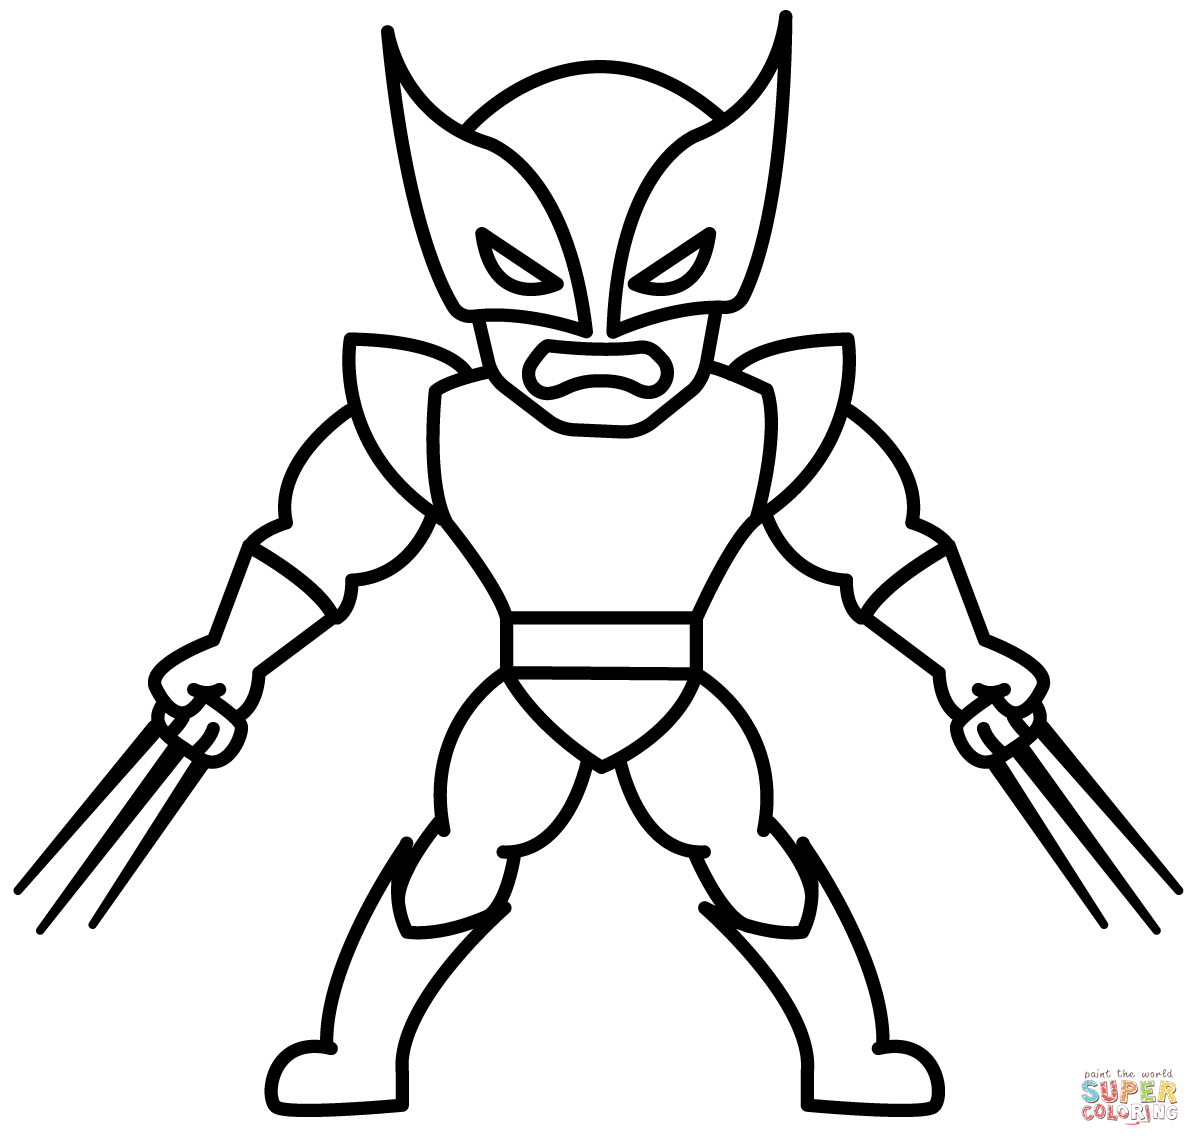 Chibi wolverine coloring page free printable coloring pages